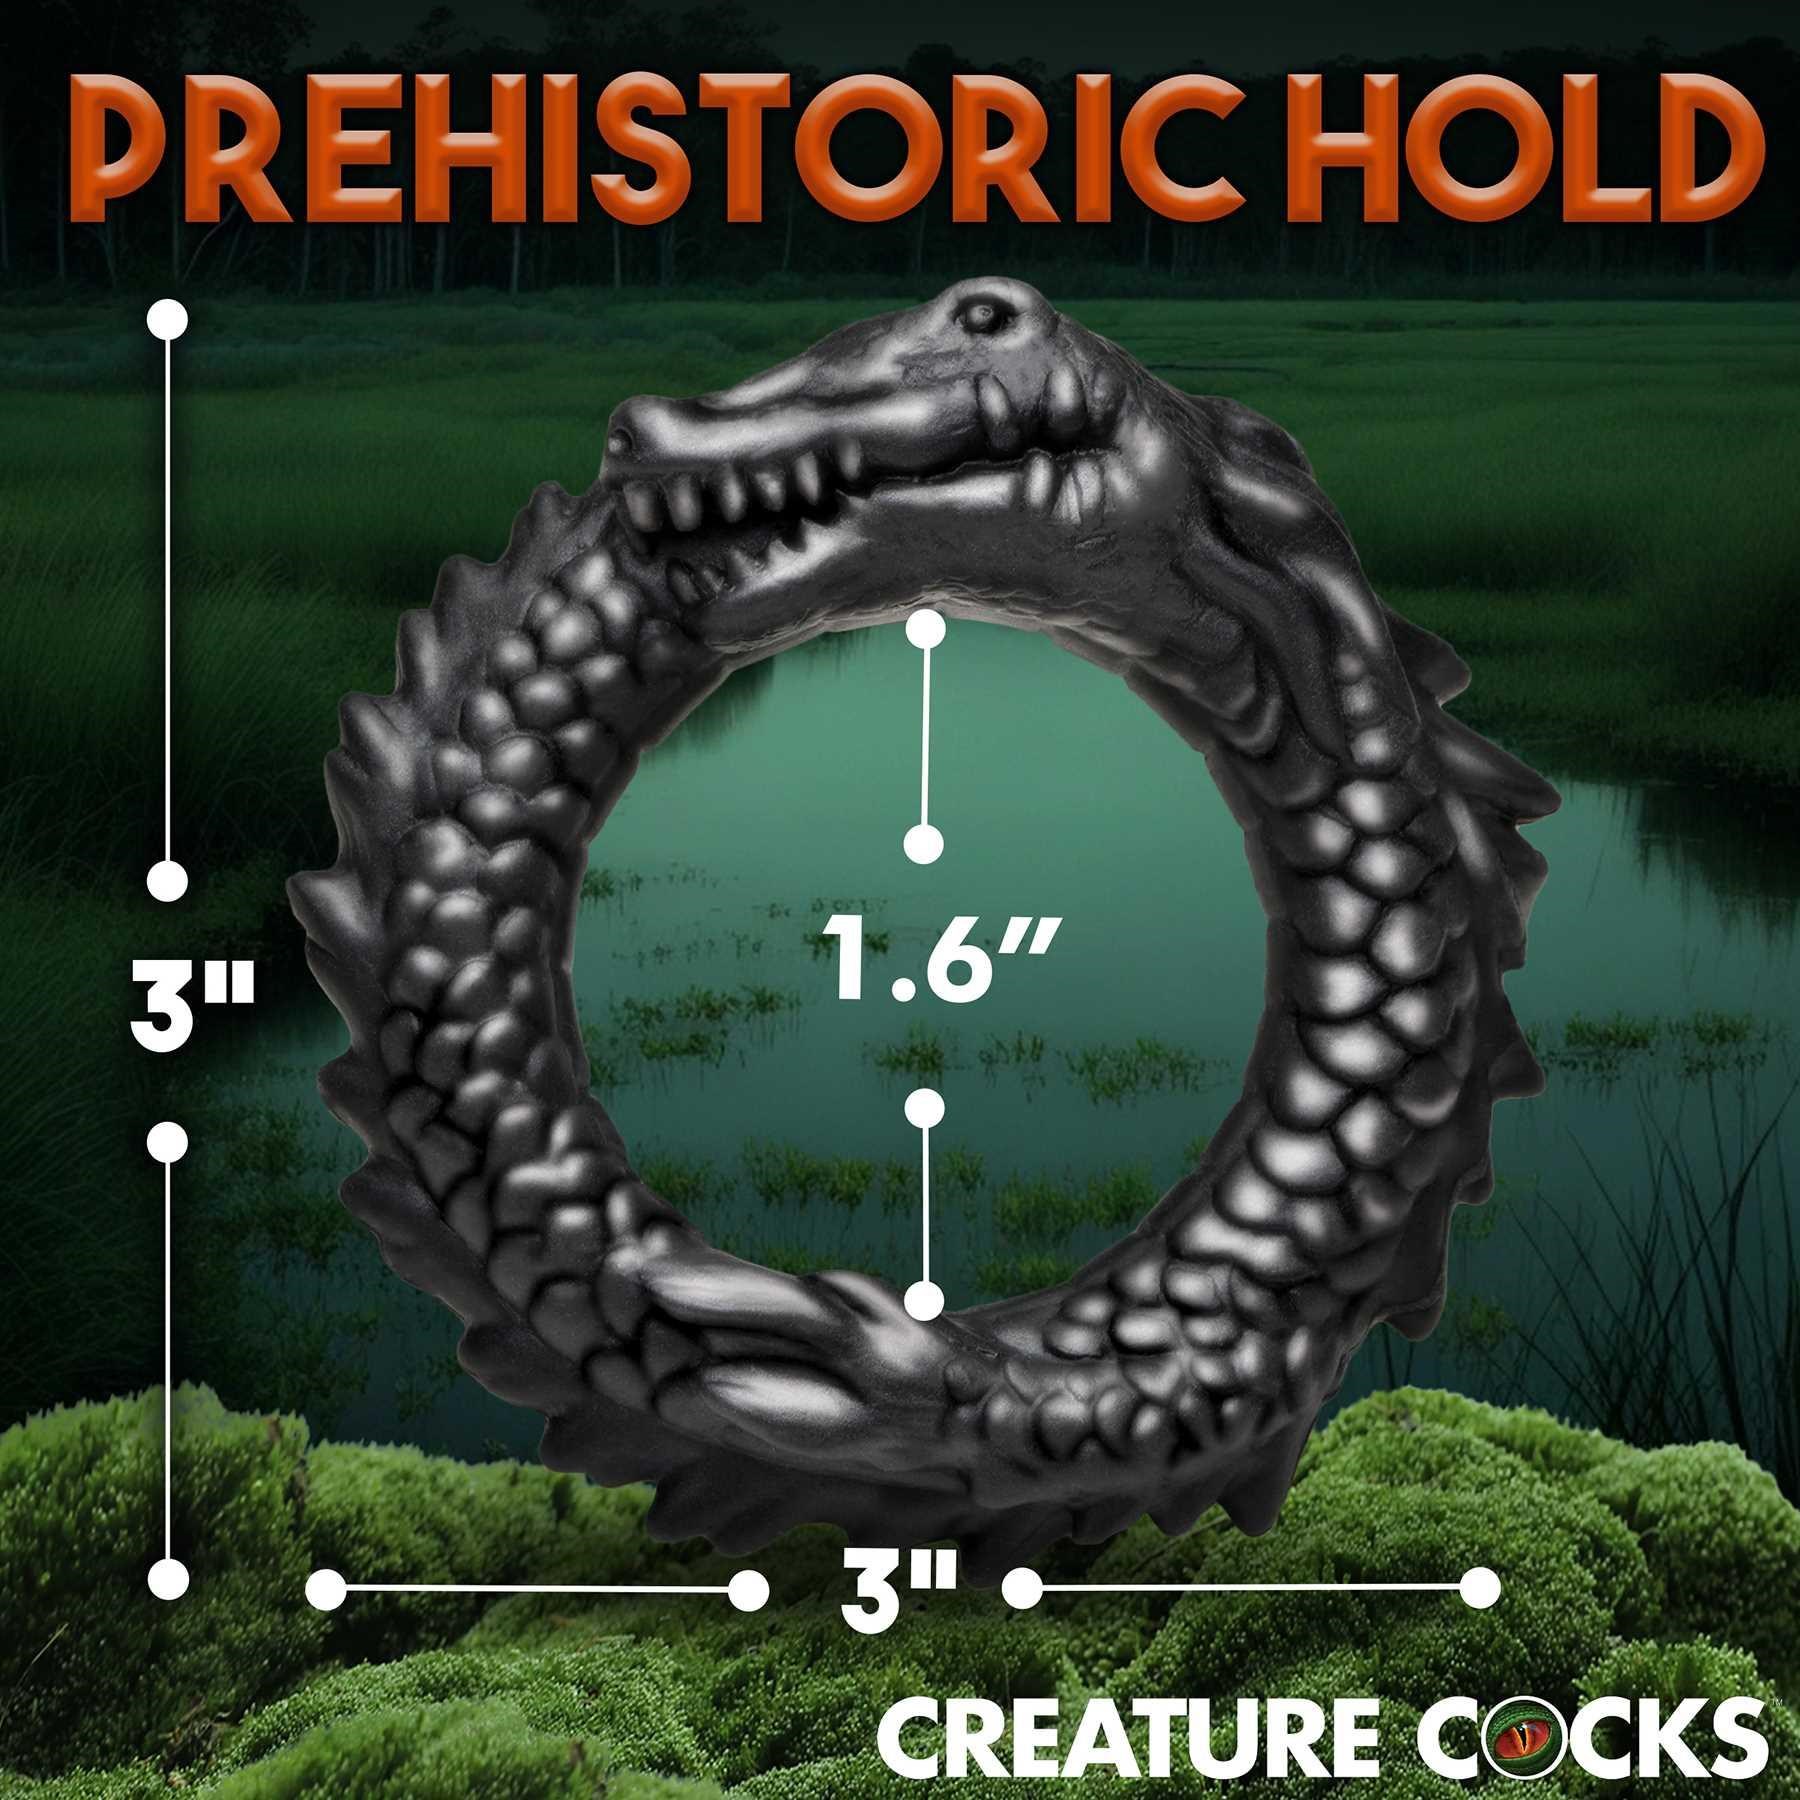 Creature Cocks Black Caiman Silicone Cock Ring dimensions spec sheet